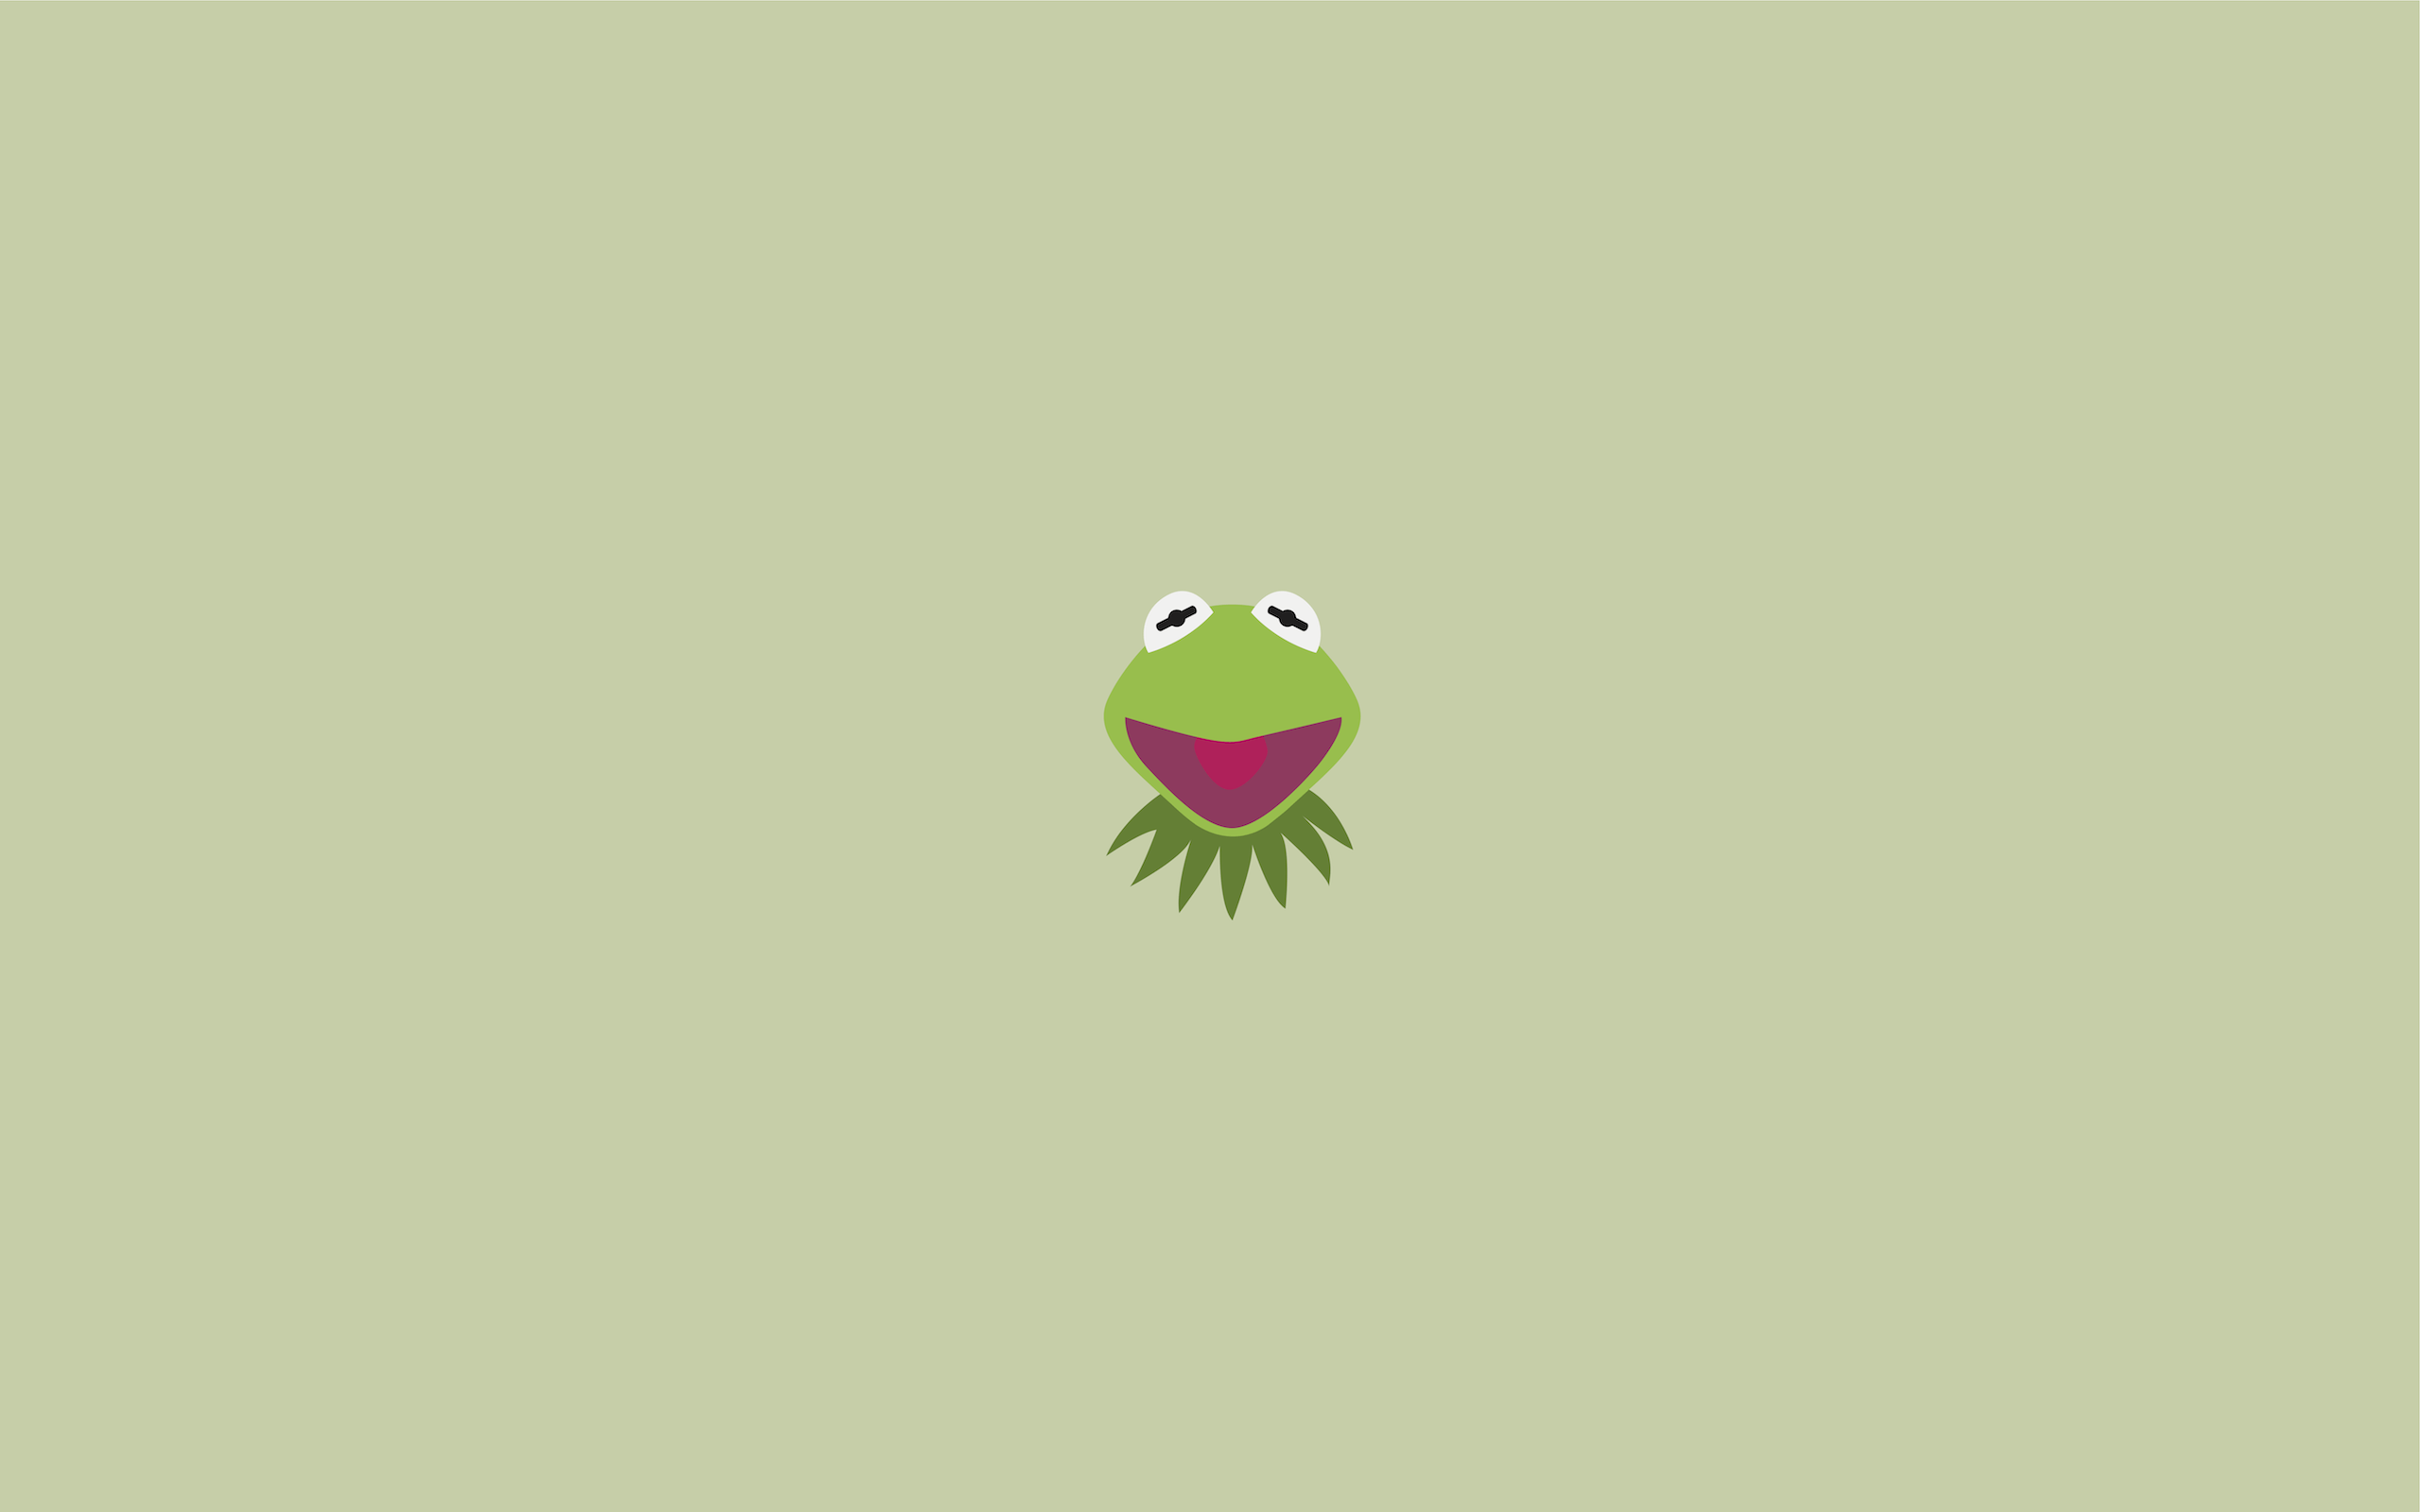 Kermit the Frog wallpaper for your computer - Frog, Kermit the Frog